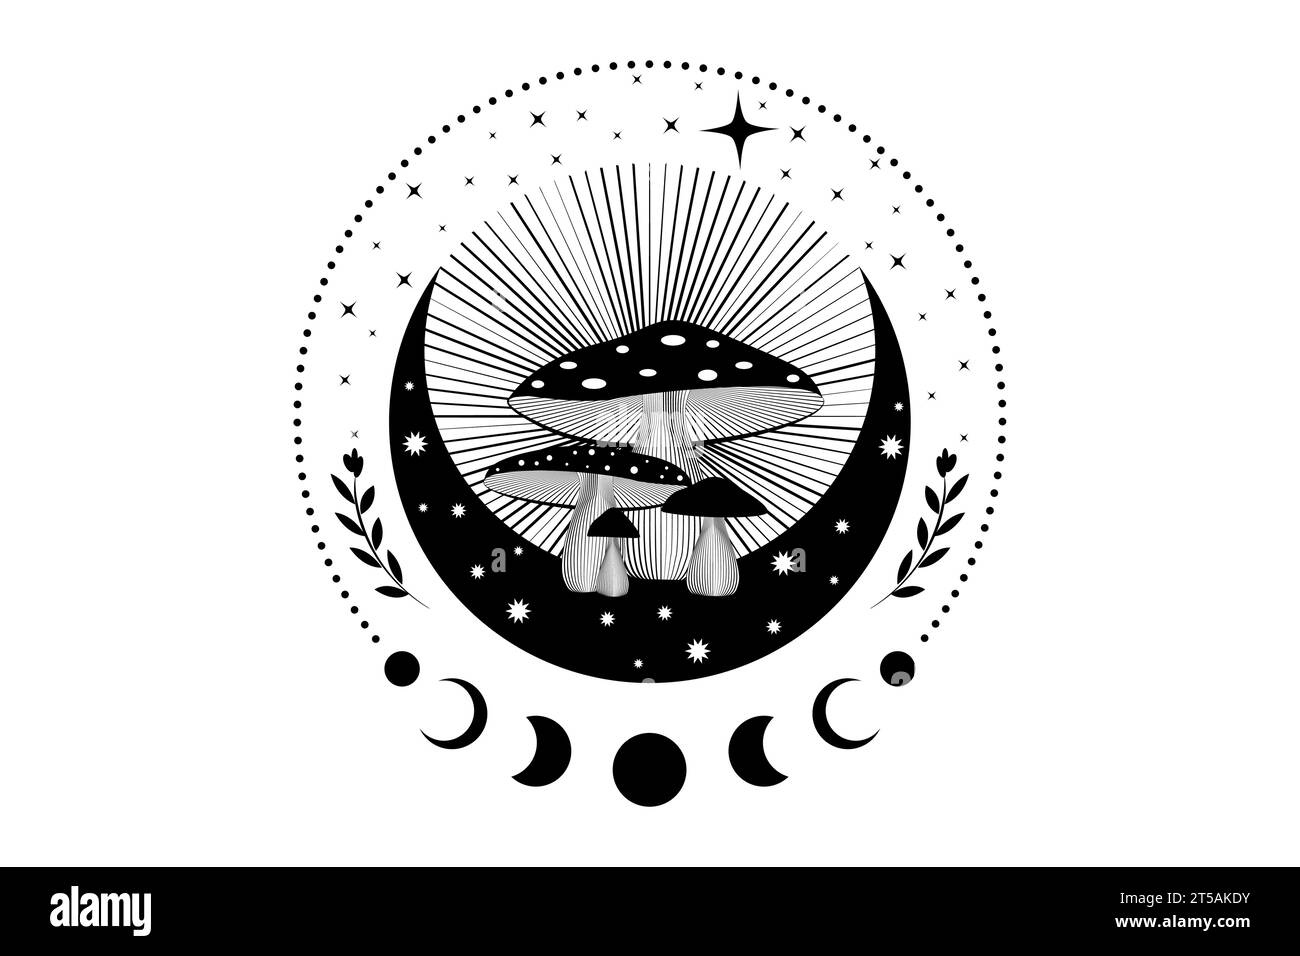 Shamanic magic mushrooms, Mystical Amanita Muscaria with moon phases and stars. Witchcraft crescent moon symbol, witchy esoteric fungus logo tattoo Stock Vector